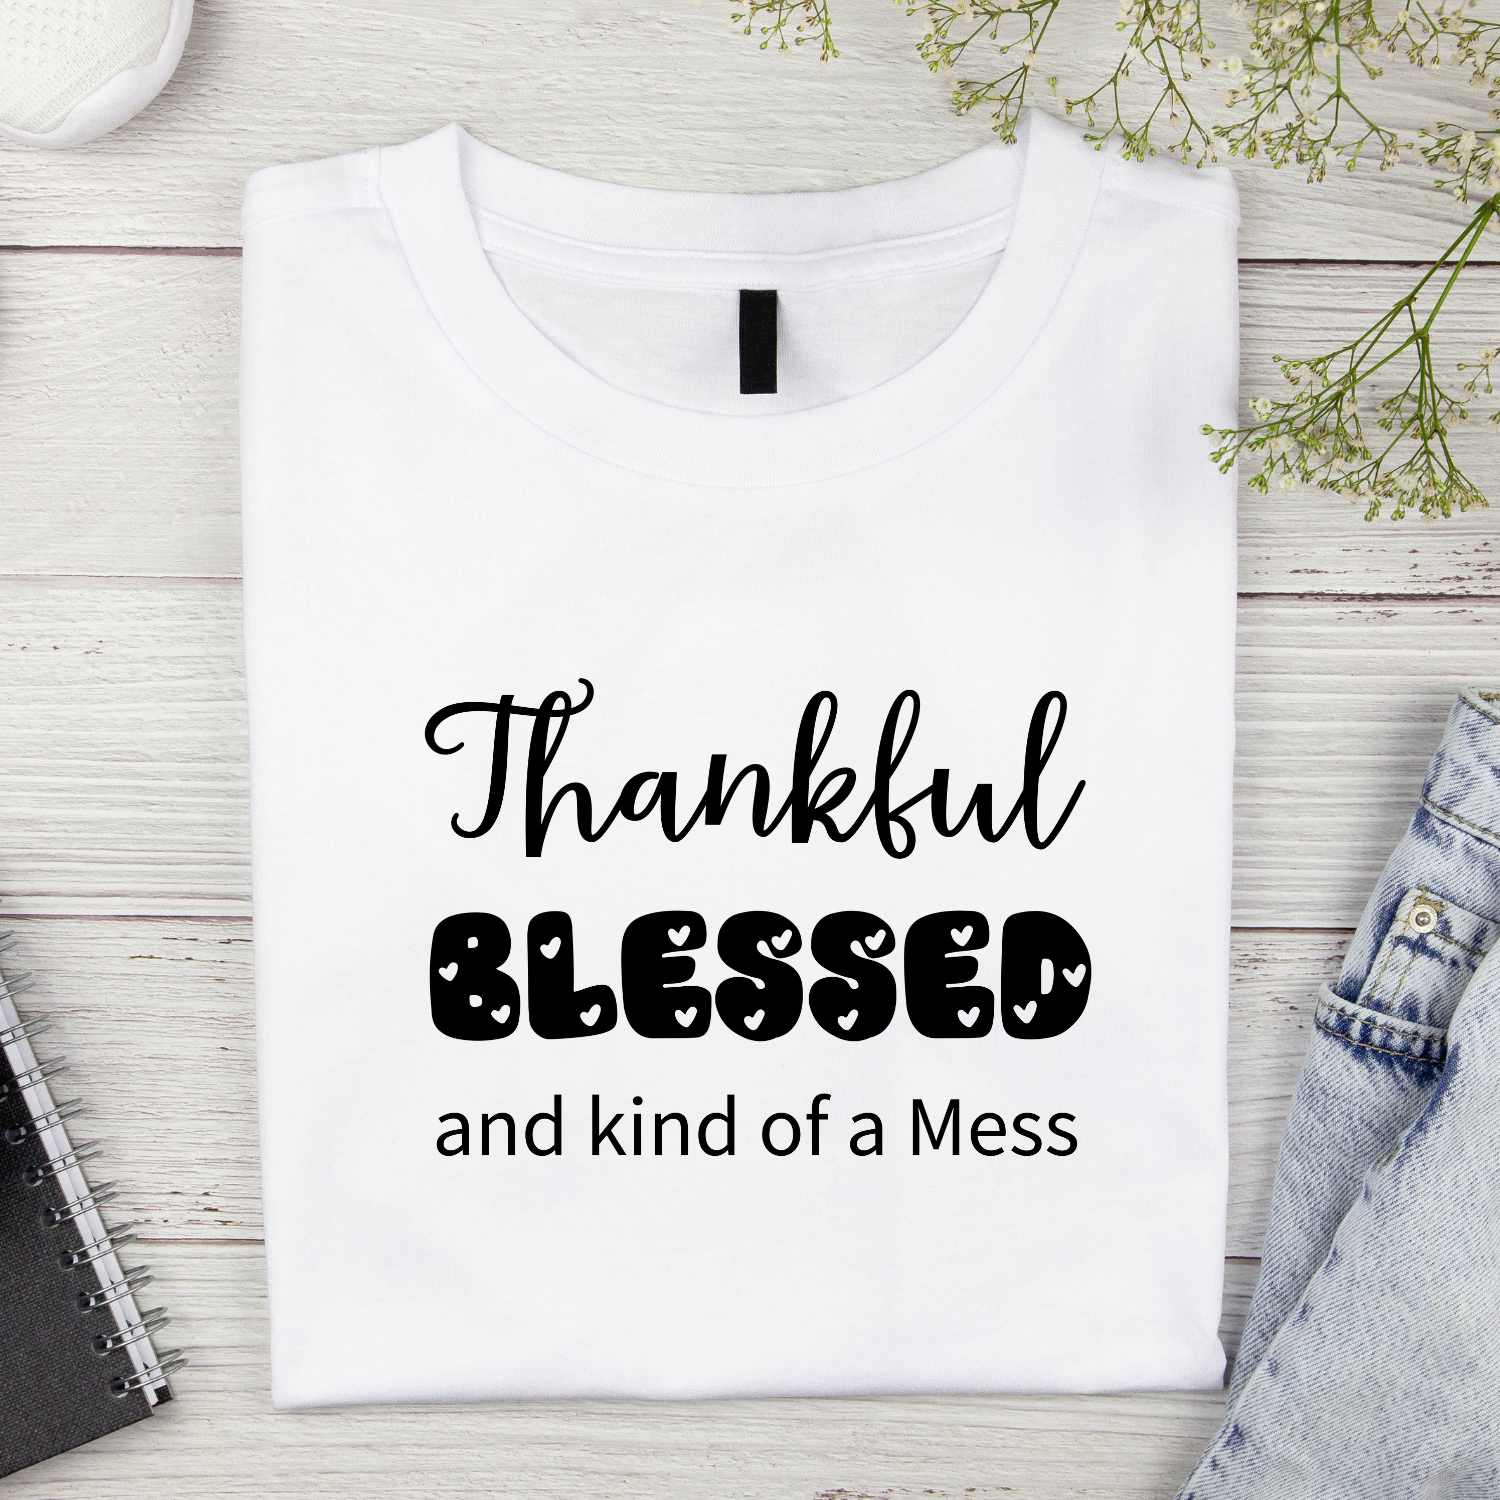 Thankful Blessed And The Kind Of A Mess Typography Tshirt Design